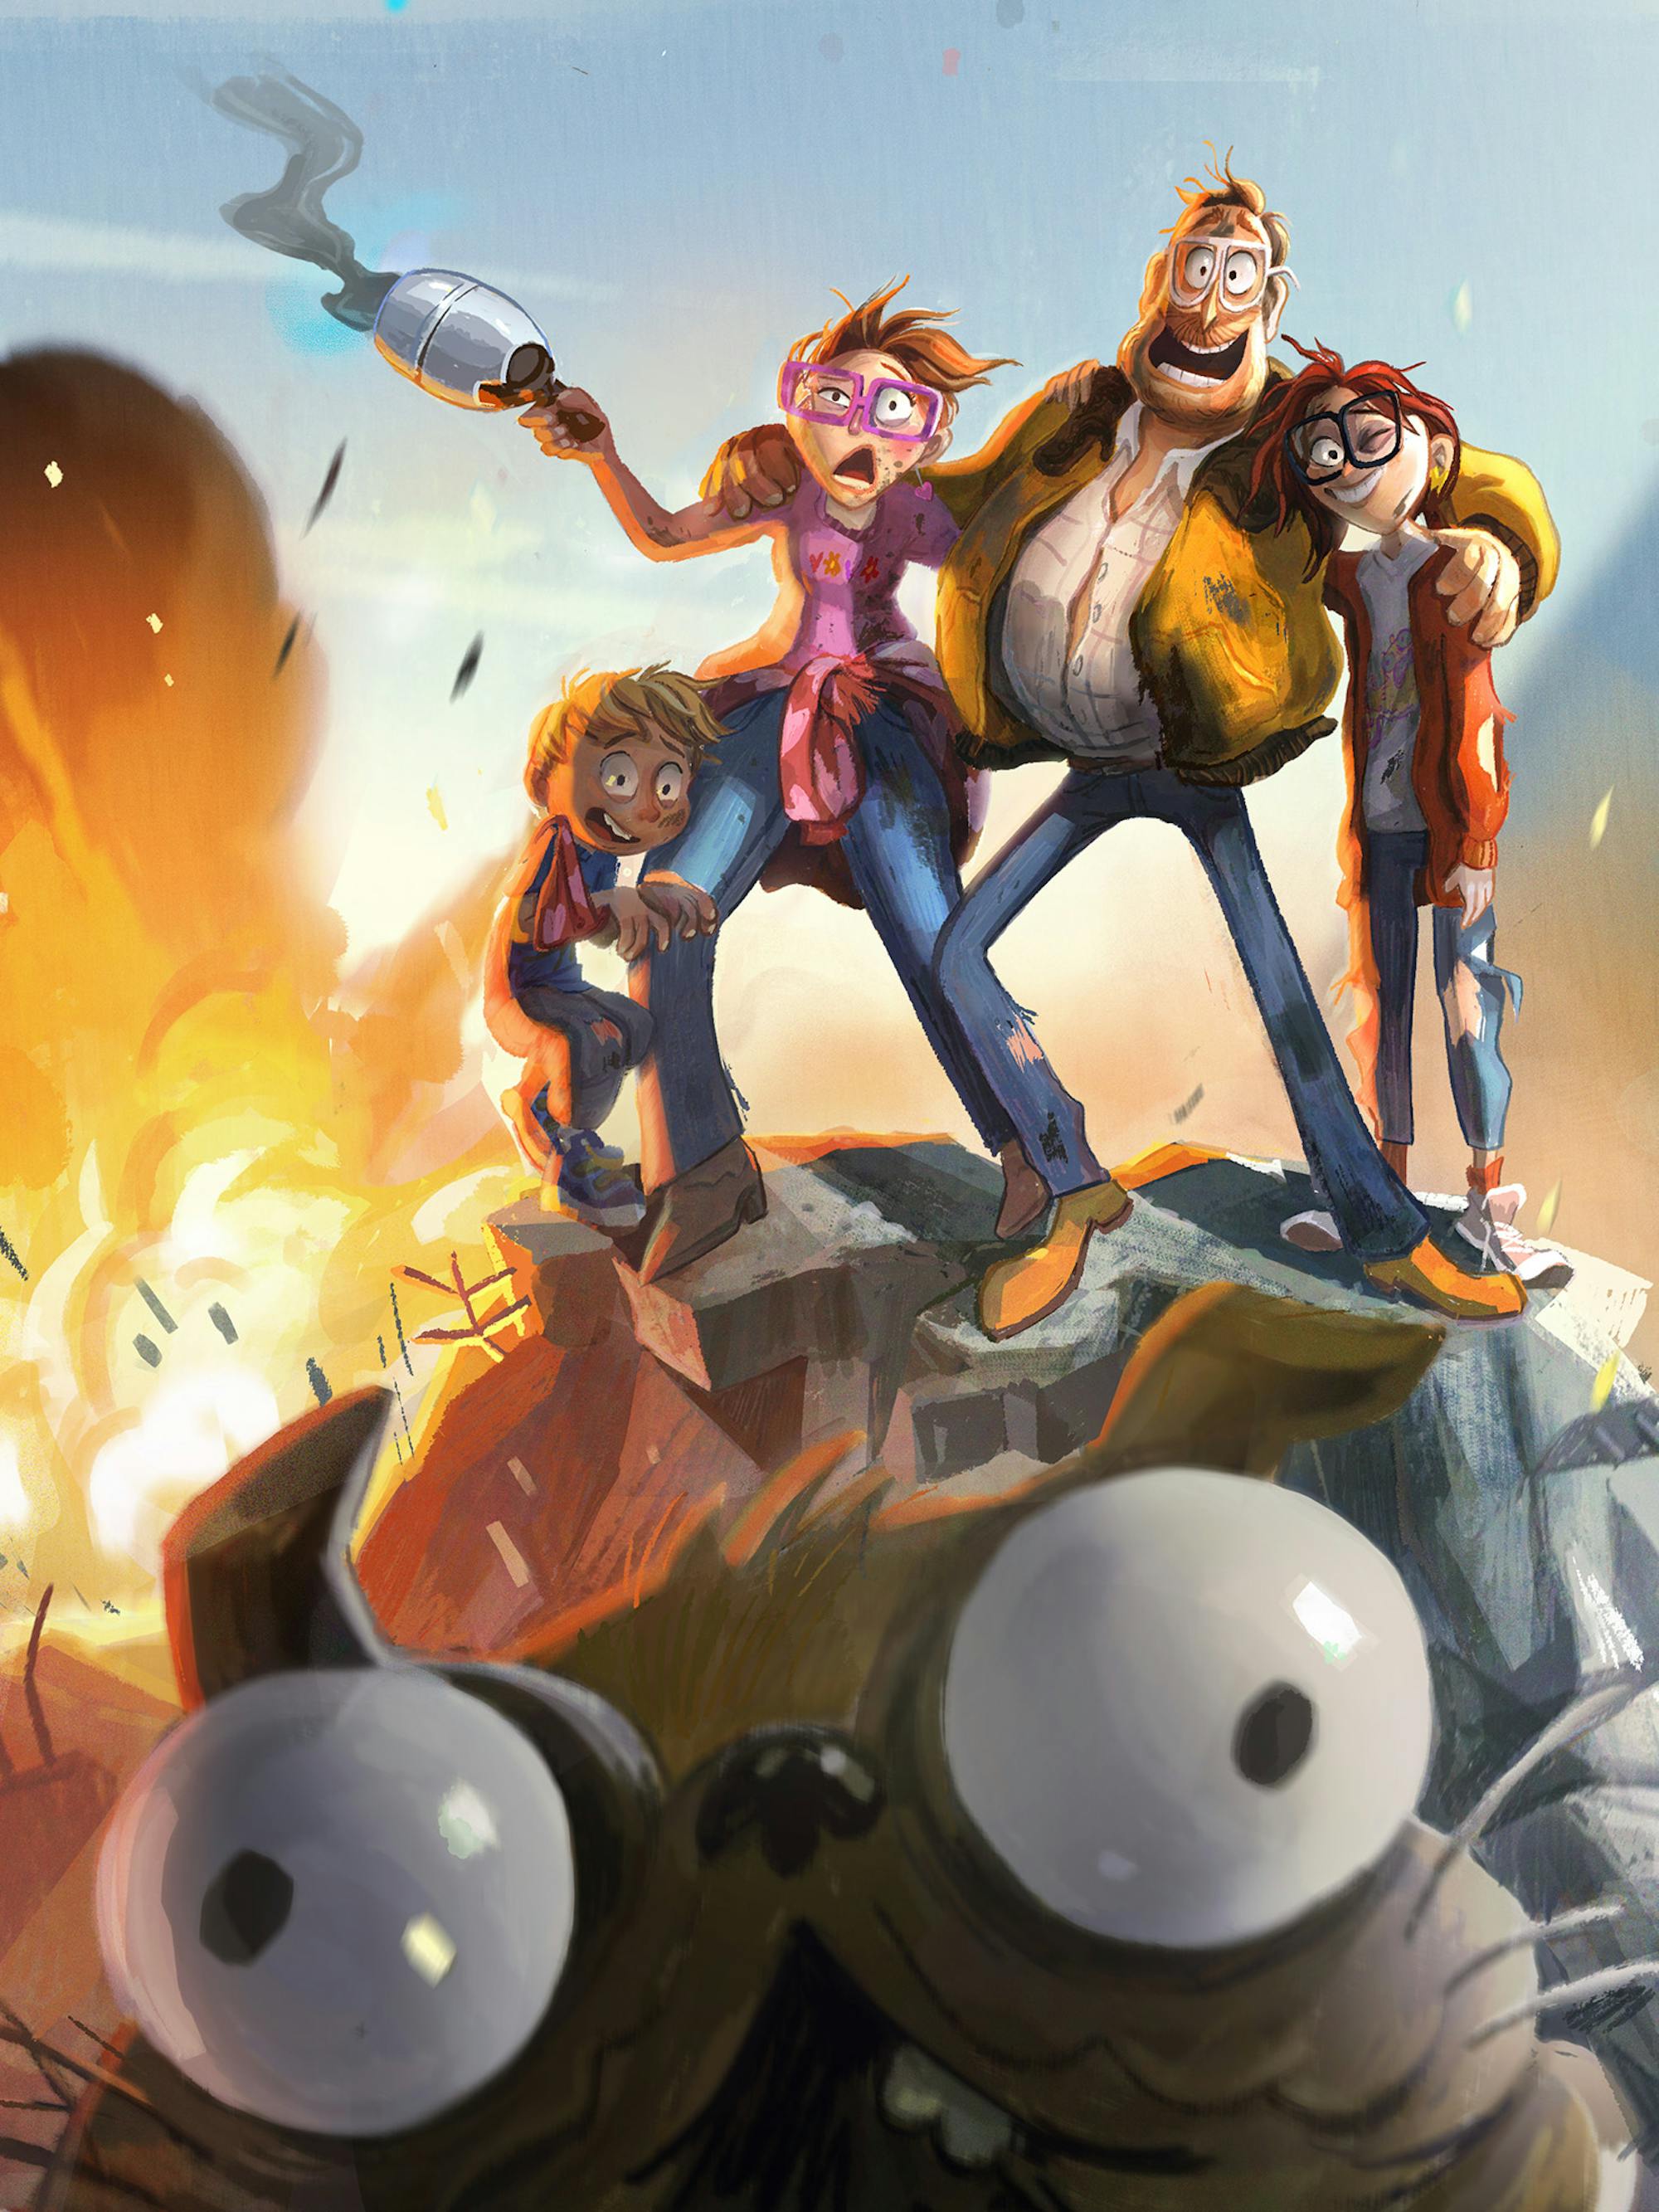 Aaron (Mike Rianda), Linda (Maya Rudolph), Rick (Danny McBride), and Katie (Abbi Jacobson) stand on top of a cliff as the world crashes and burns around them. Close to the camera is Monchi the pug whose bulging eyes appear even more googly and cross-eyed.